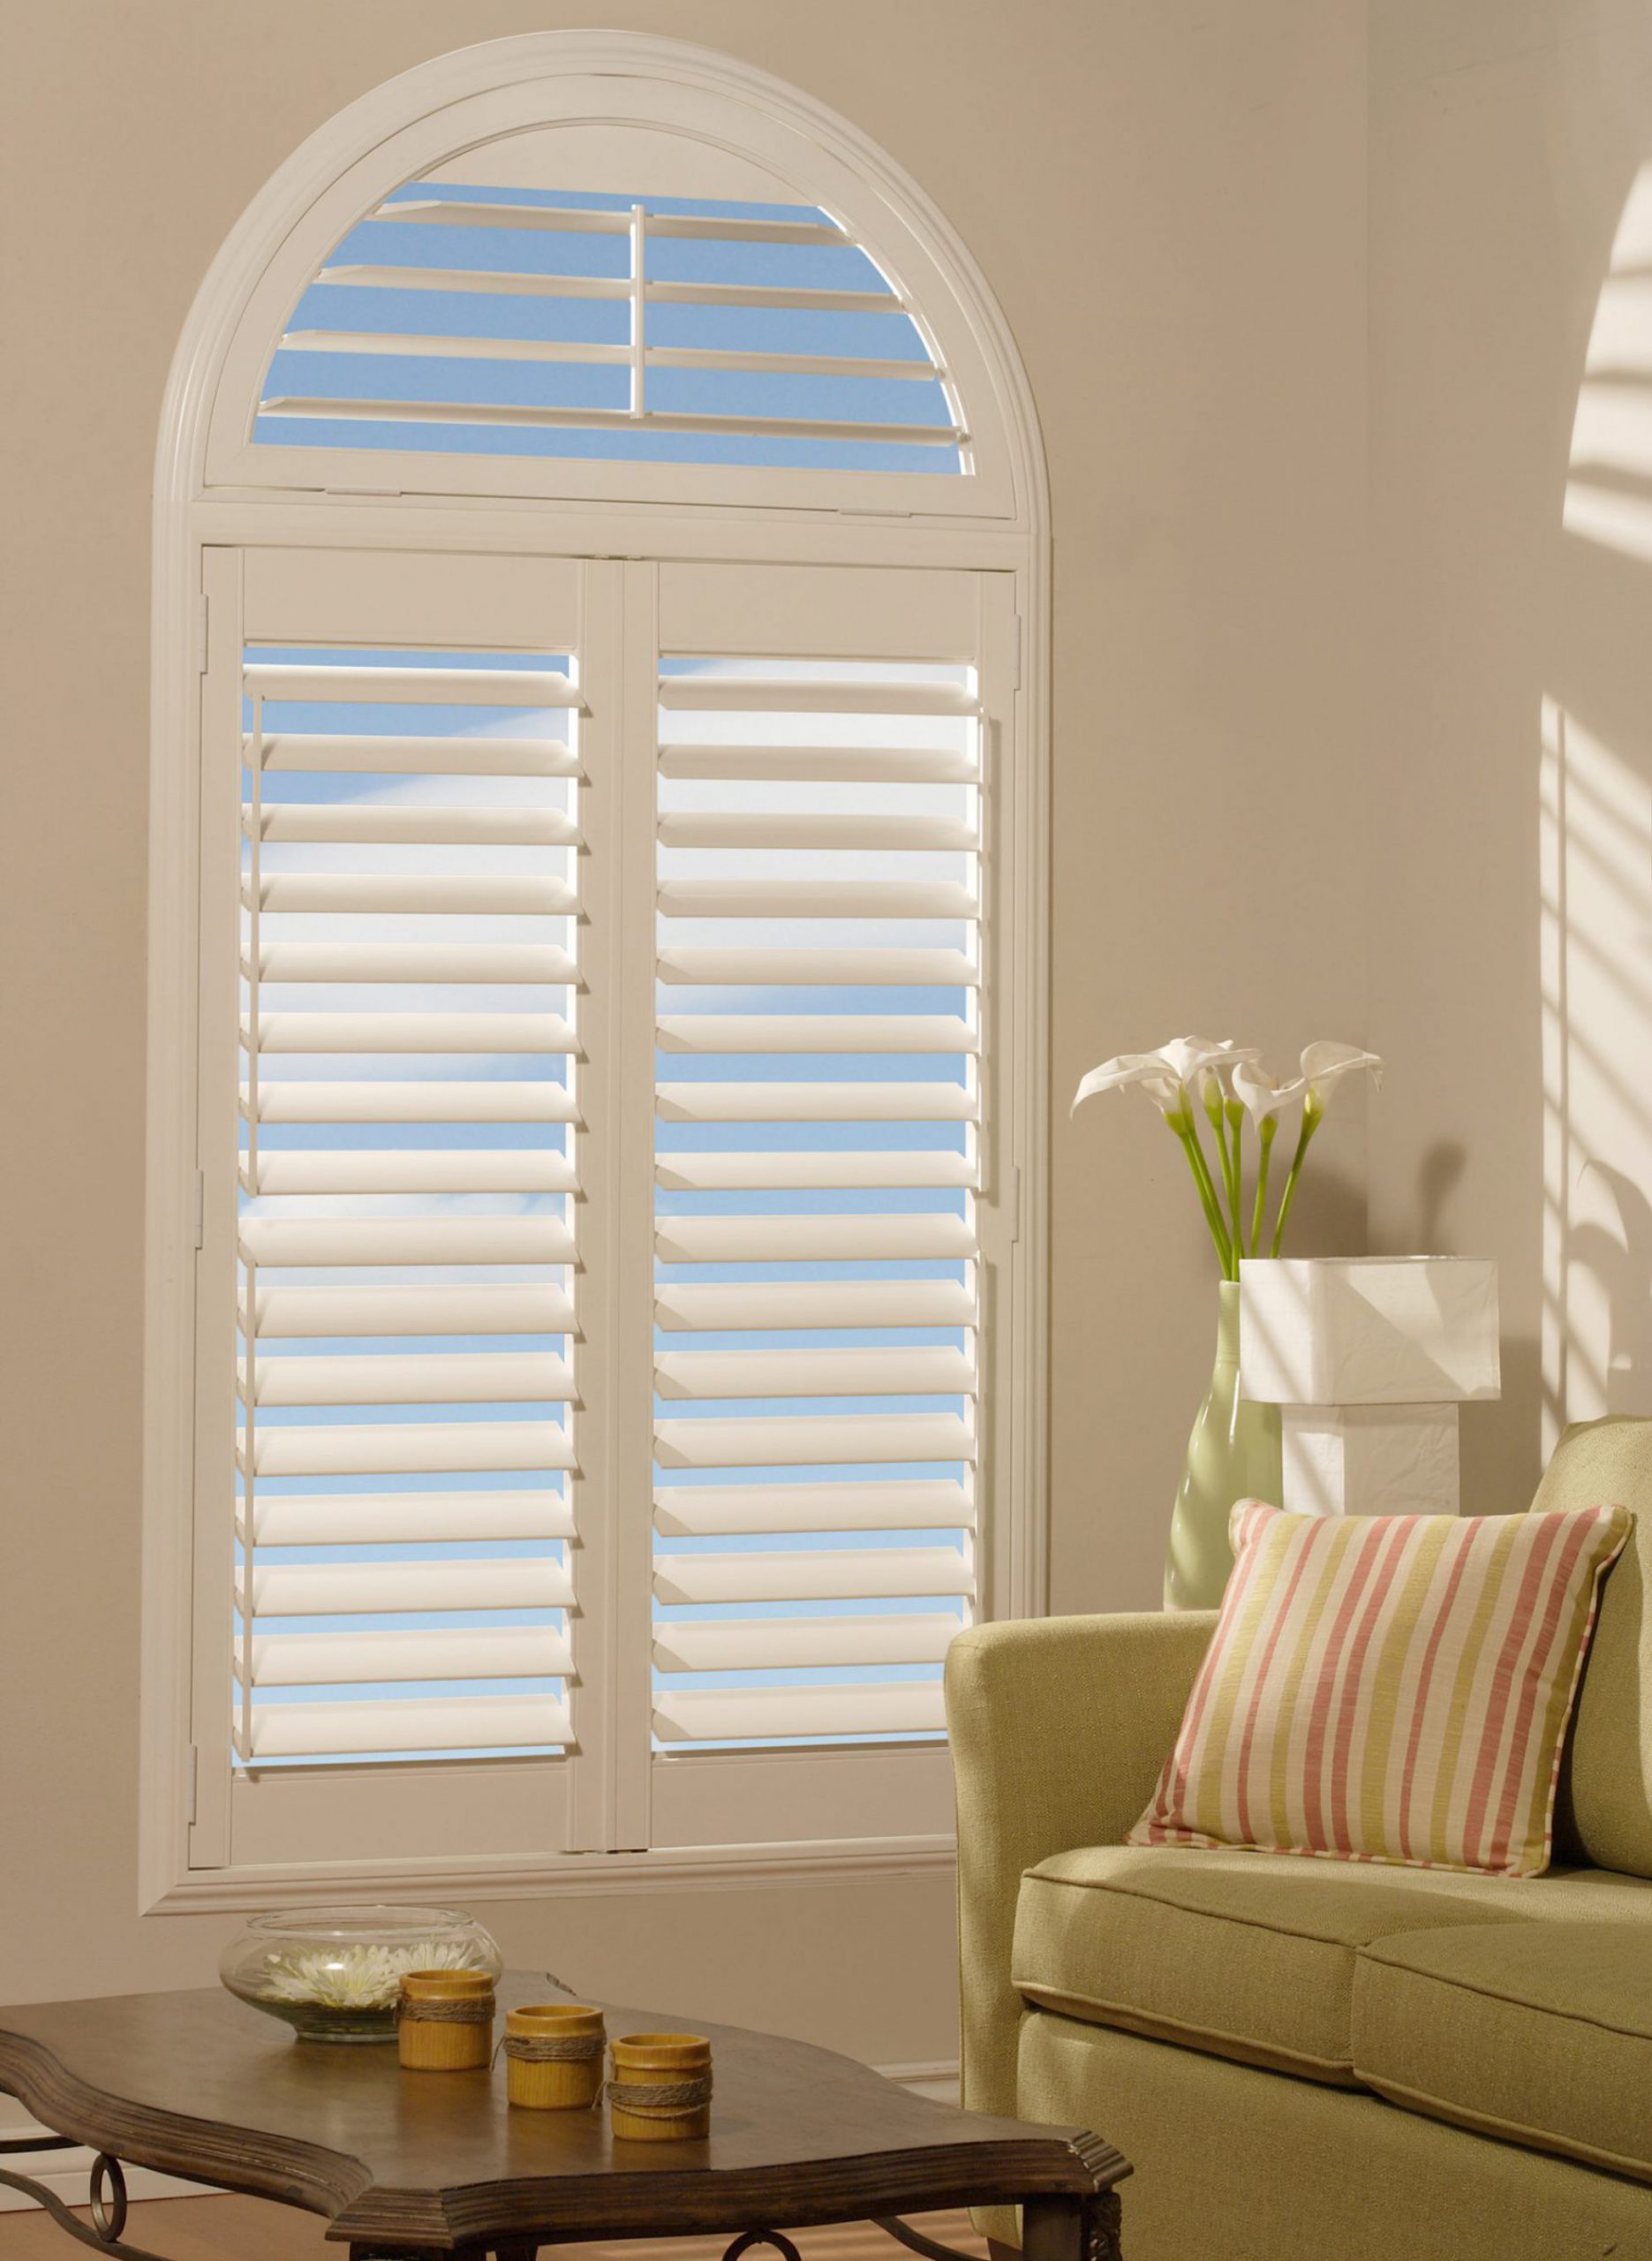 R&S Window covering